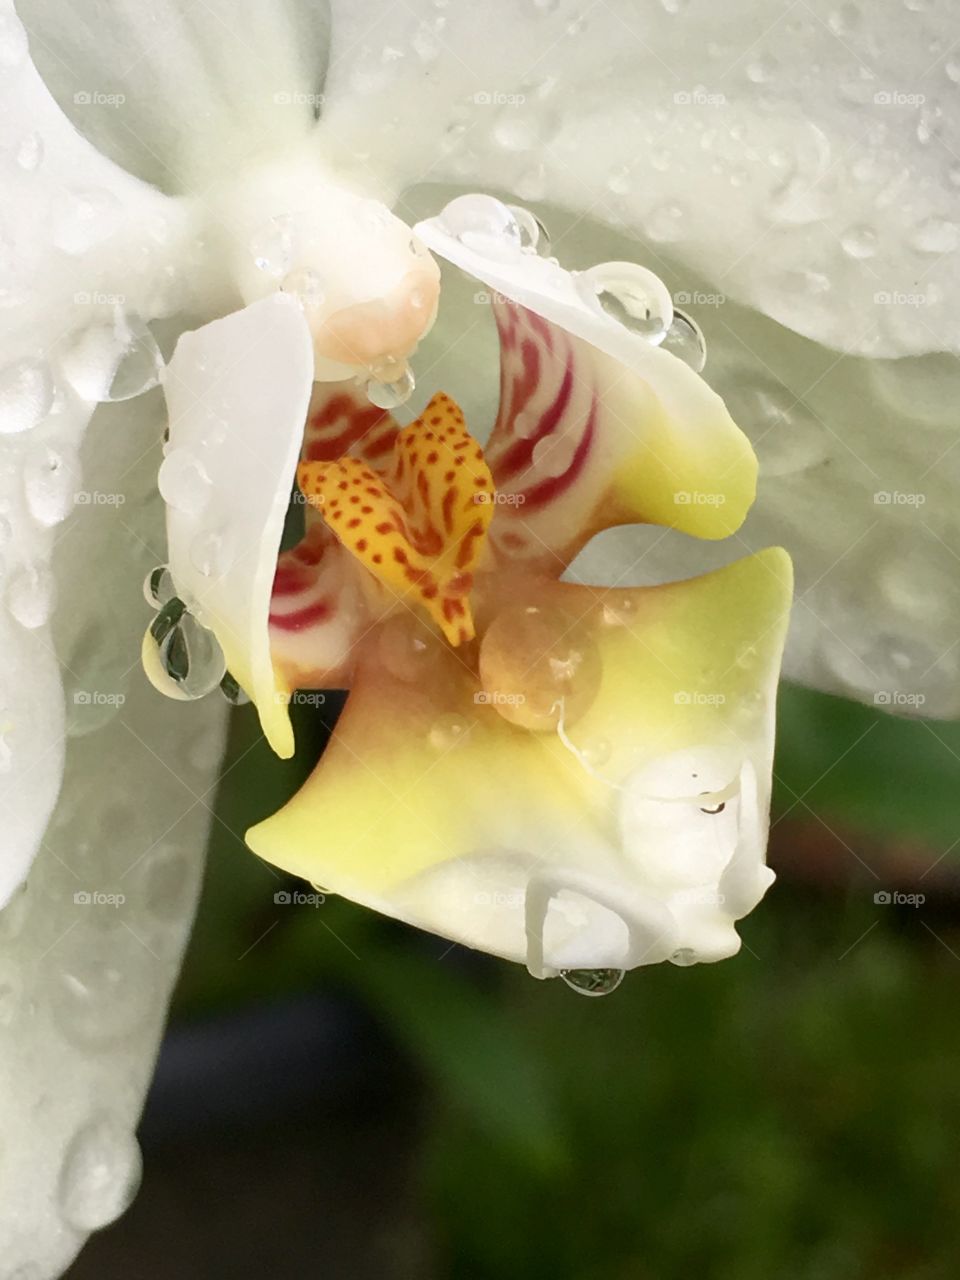 An eagle flies within this orchid’s bloom- fresh from the rain, delicately fragrant and fleeting.